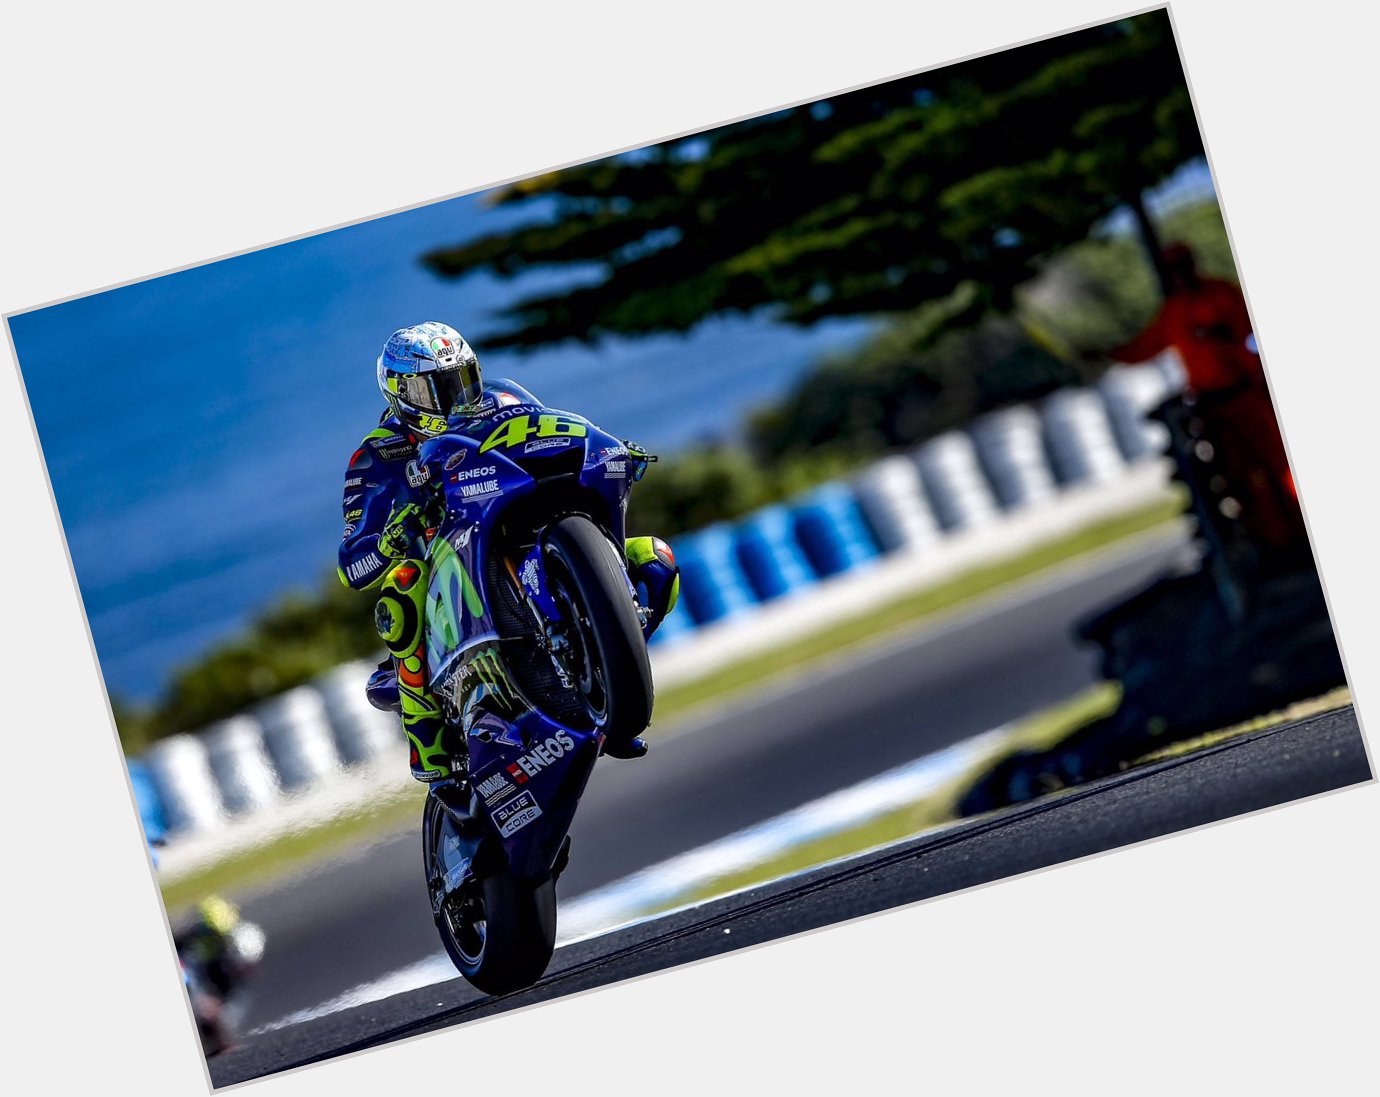 Happy Birthday 2 the 1 & only total legend, & my hero Valentino Rossi Love & best wishes for a fun safe birthday Xx 